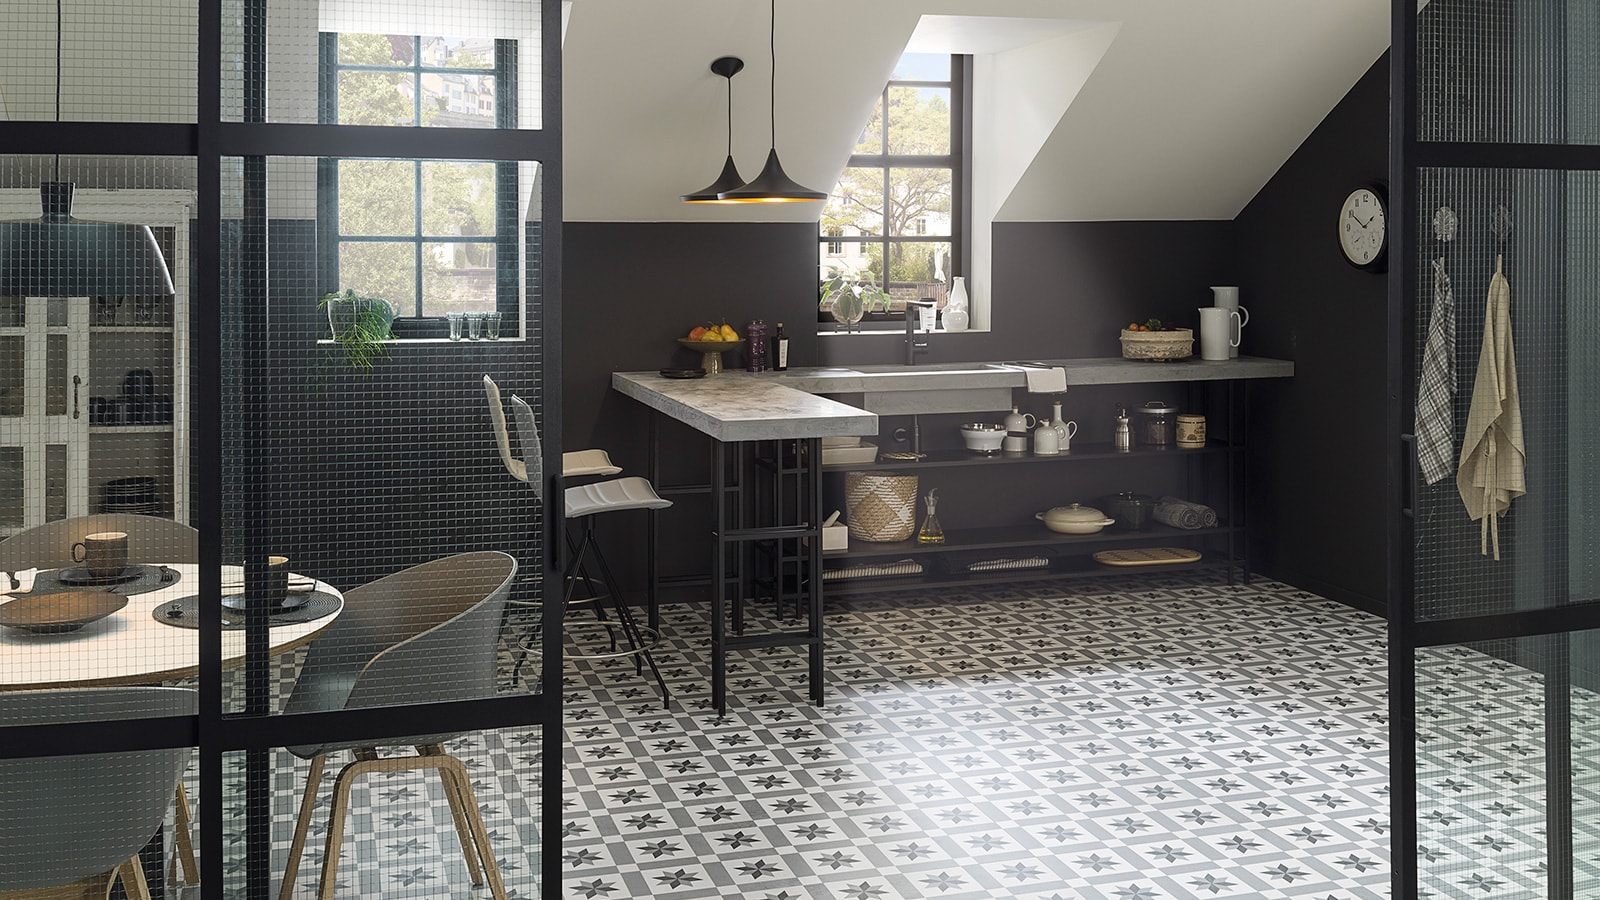 PORCELANOSA opts for hydraulic pieces and a Modernist style with its Medina collection